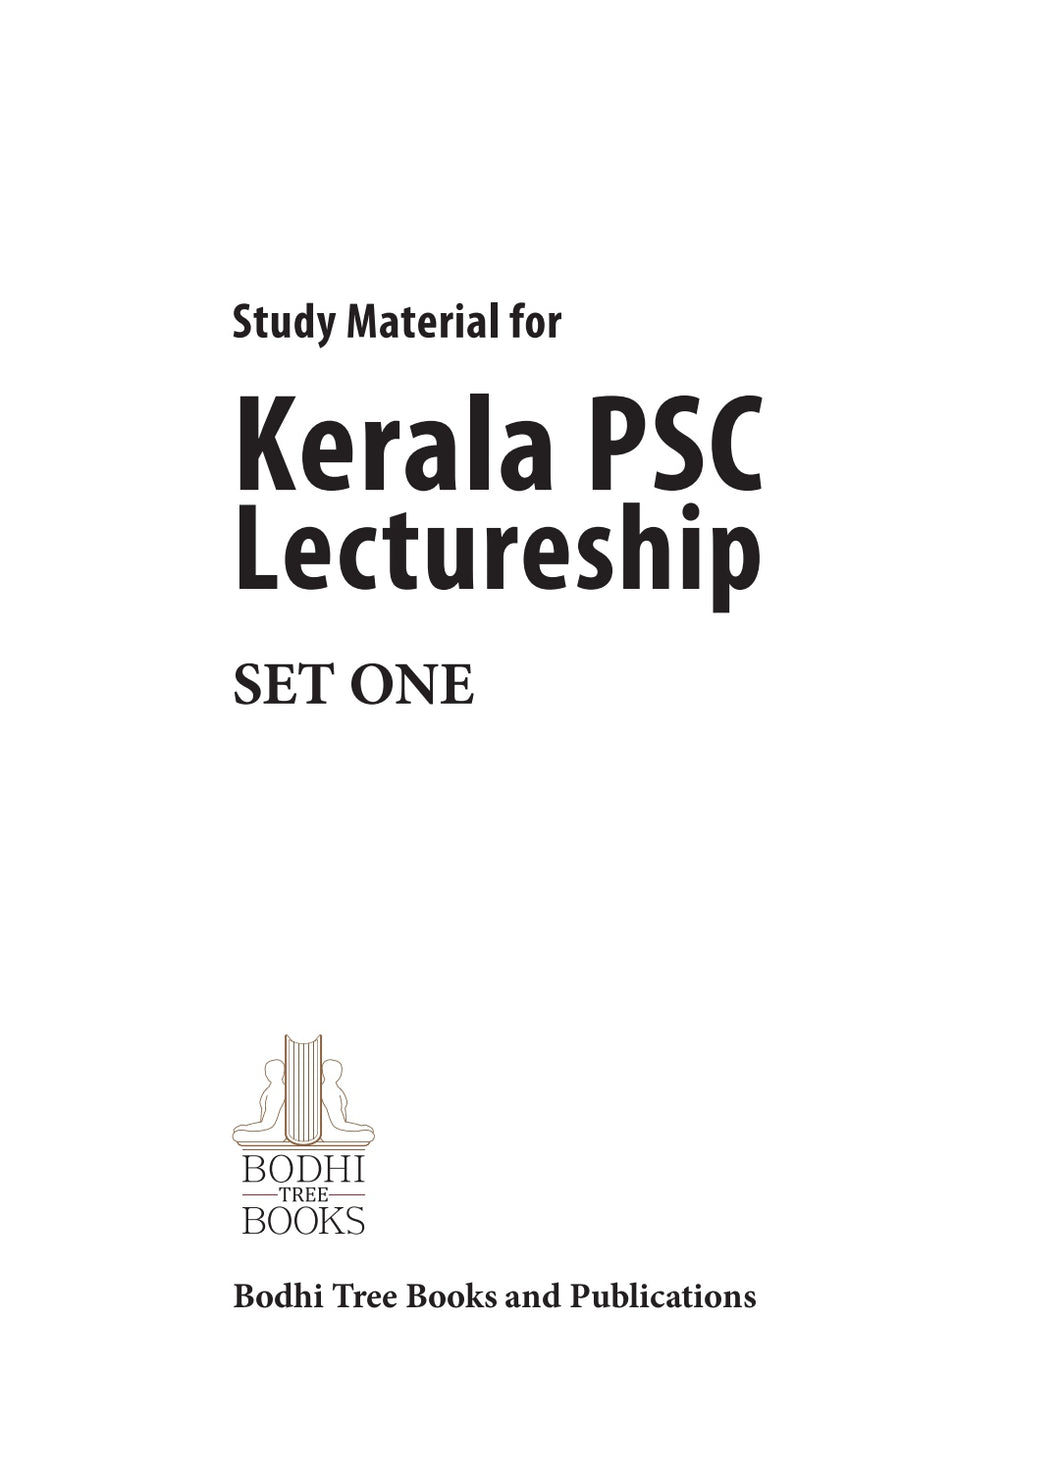 Study Material for Kerala PSC Lectureship SET ONE